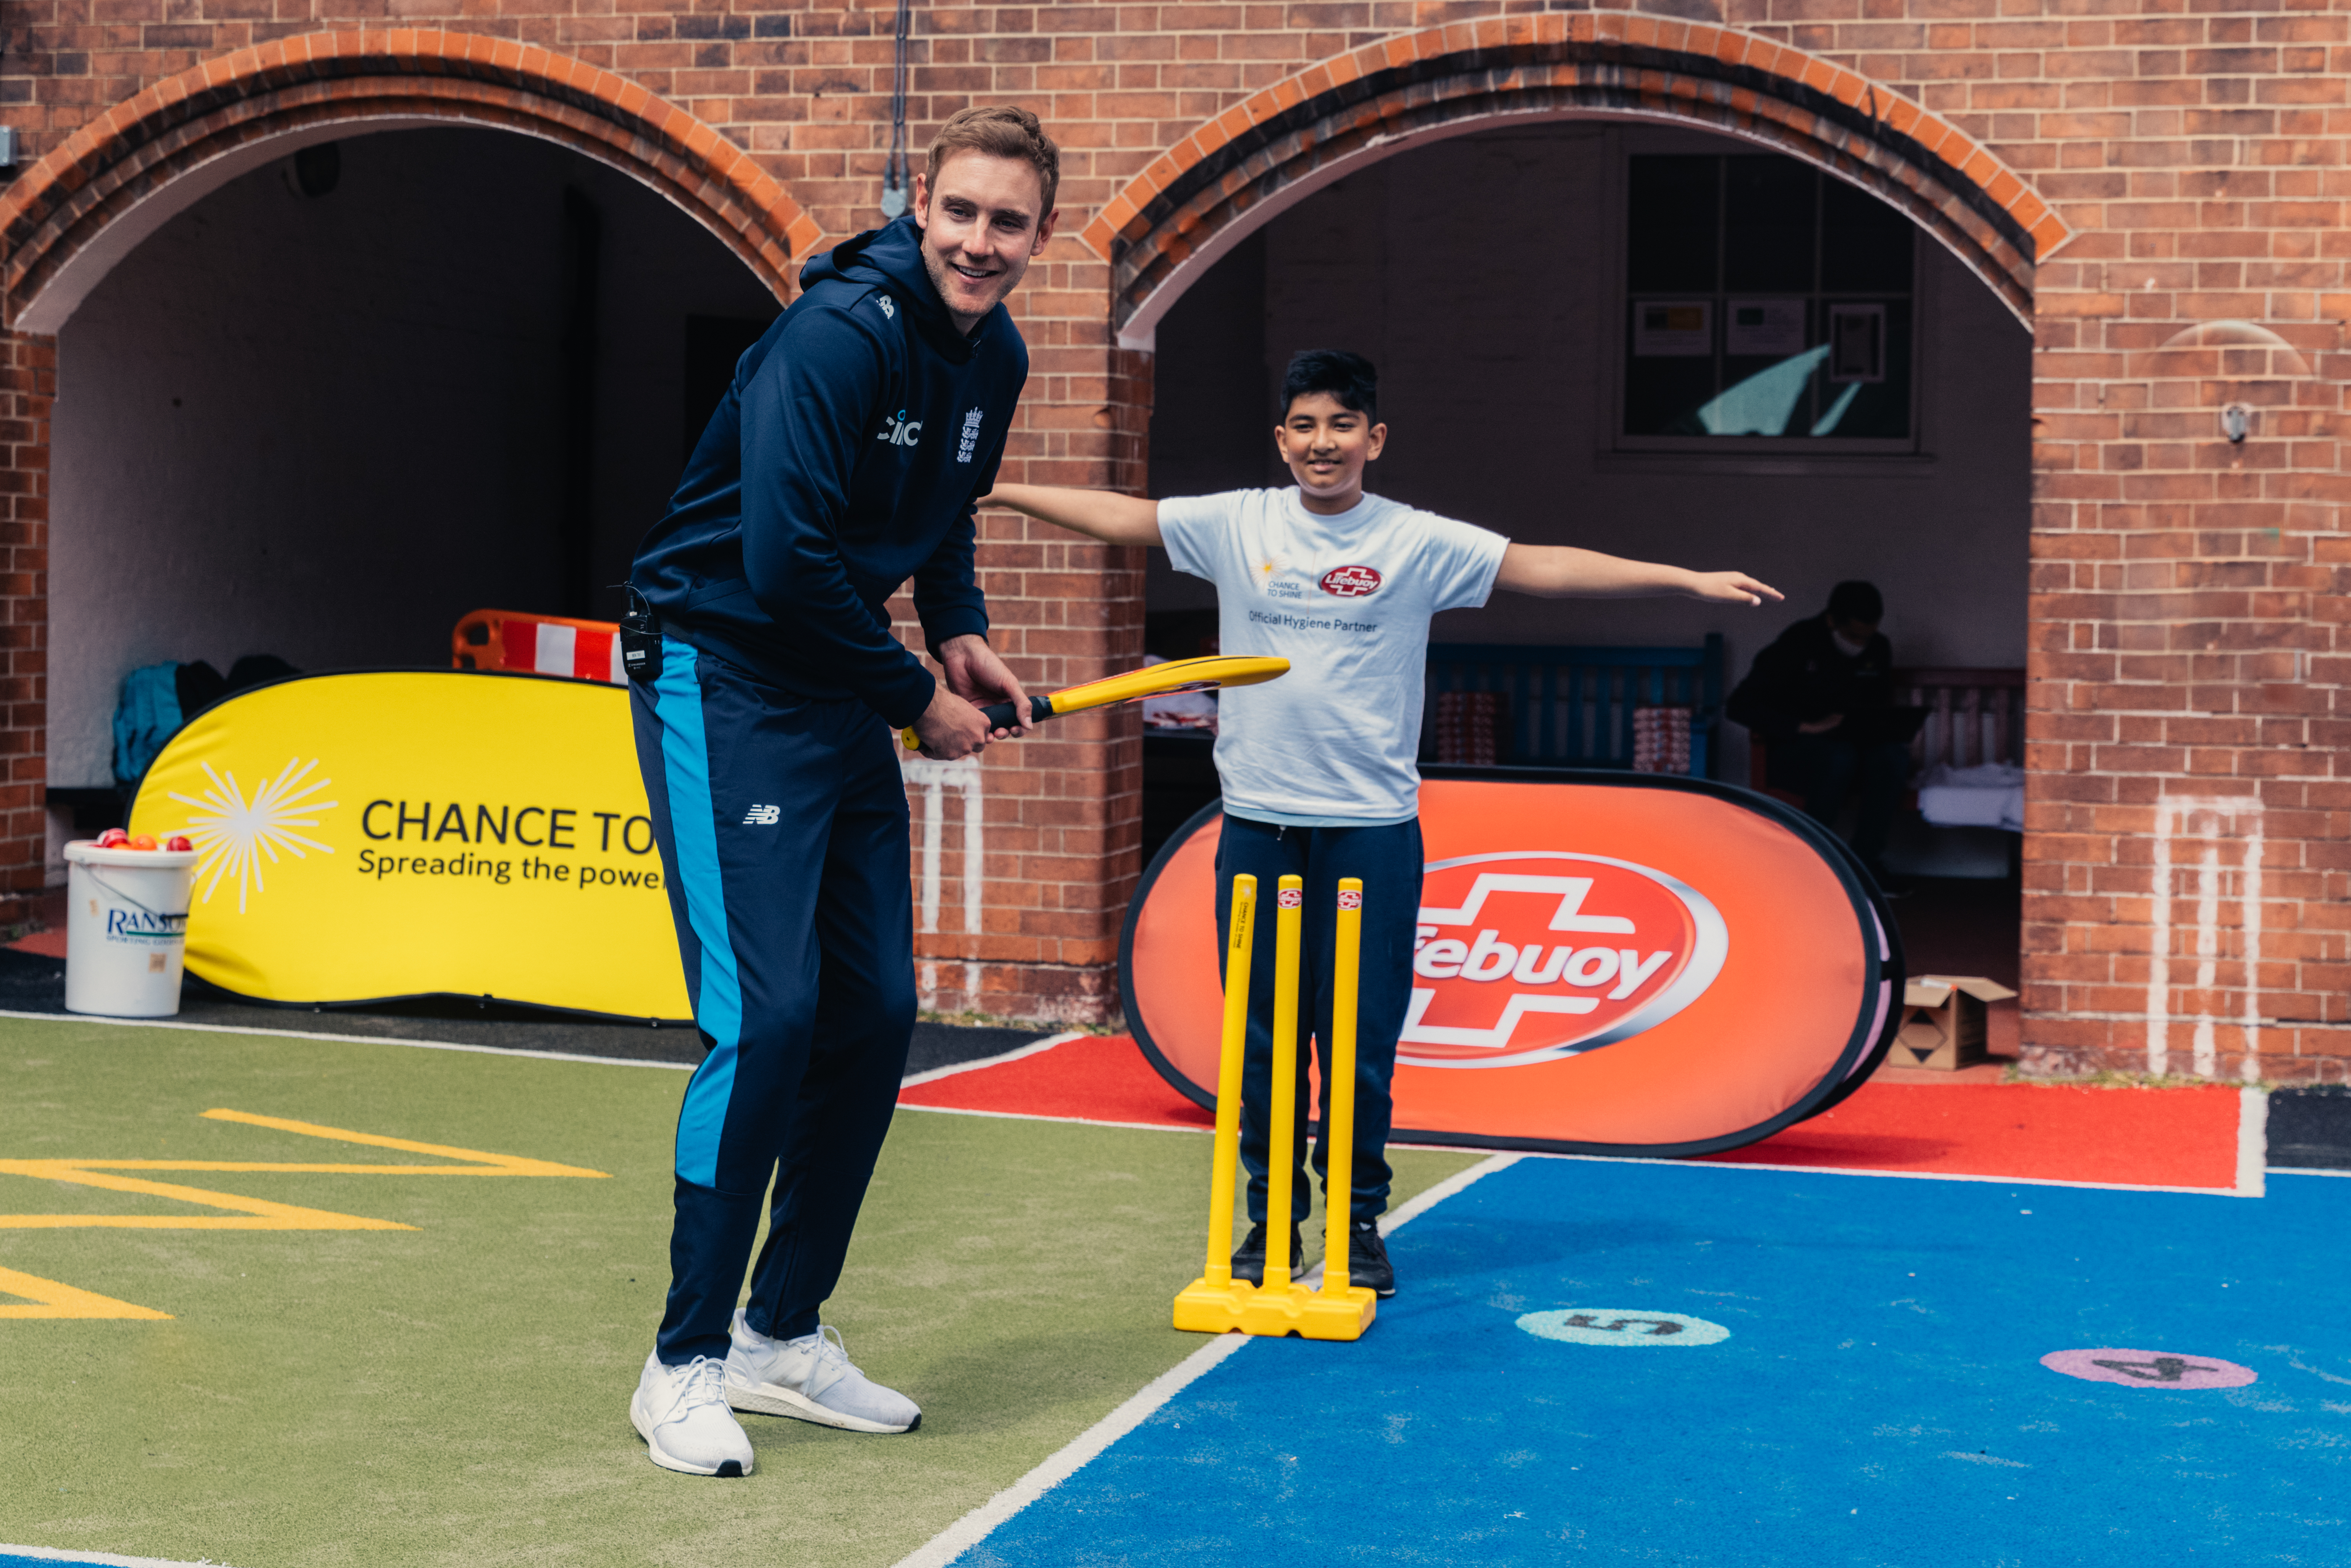 Broad was taking part in an event at Hague Primary School.